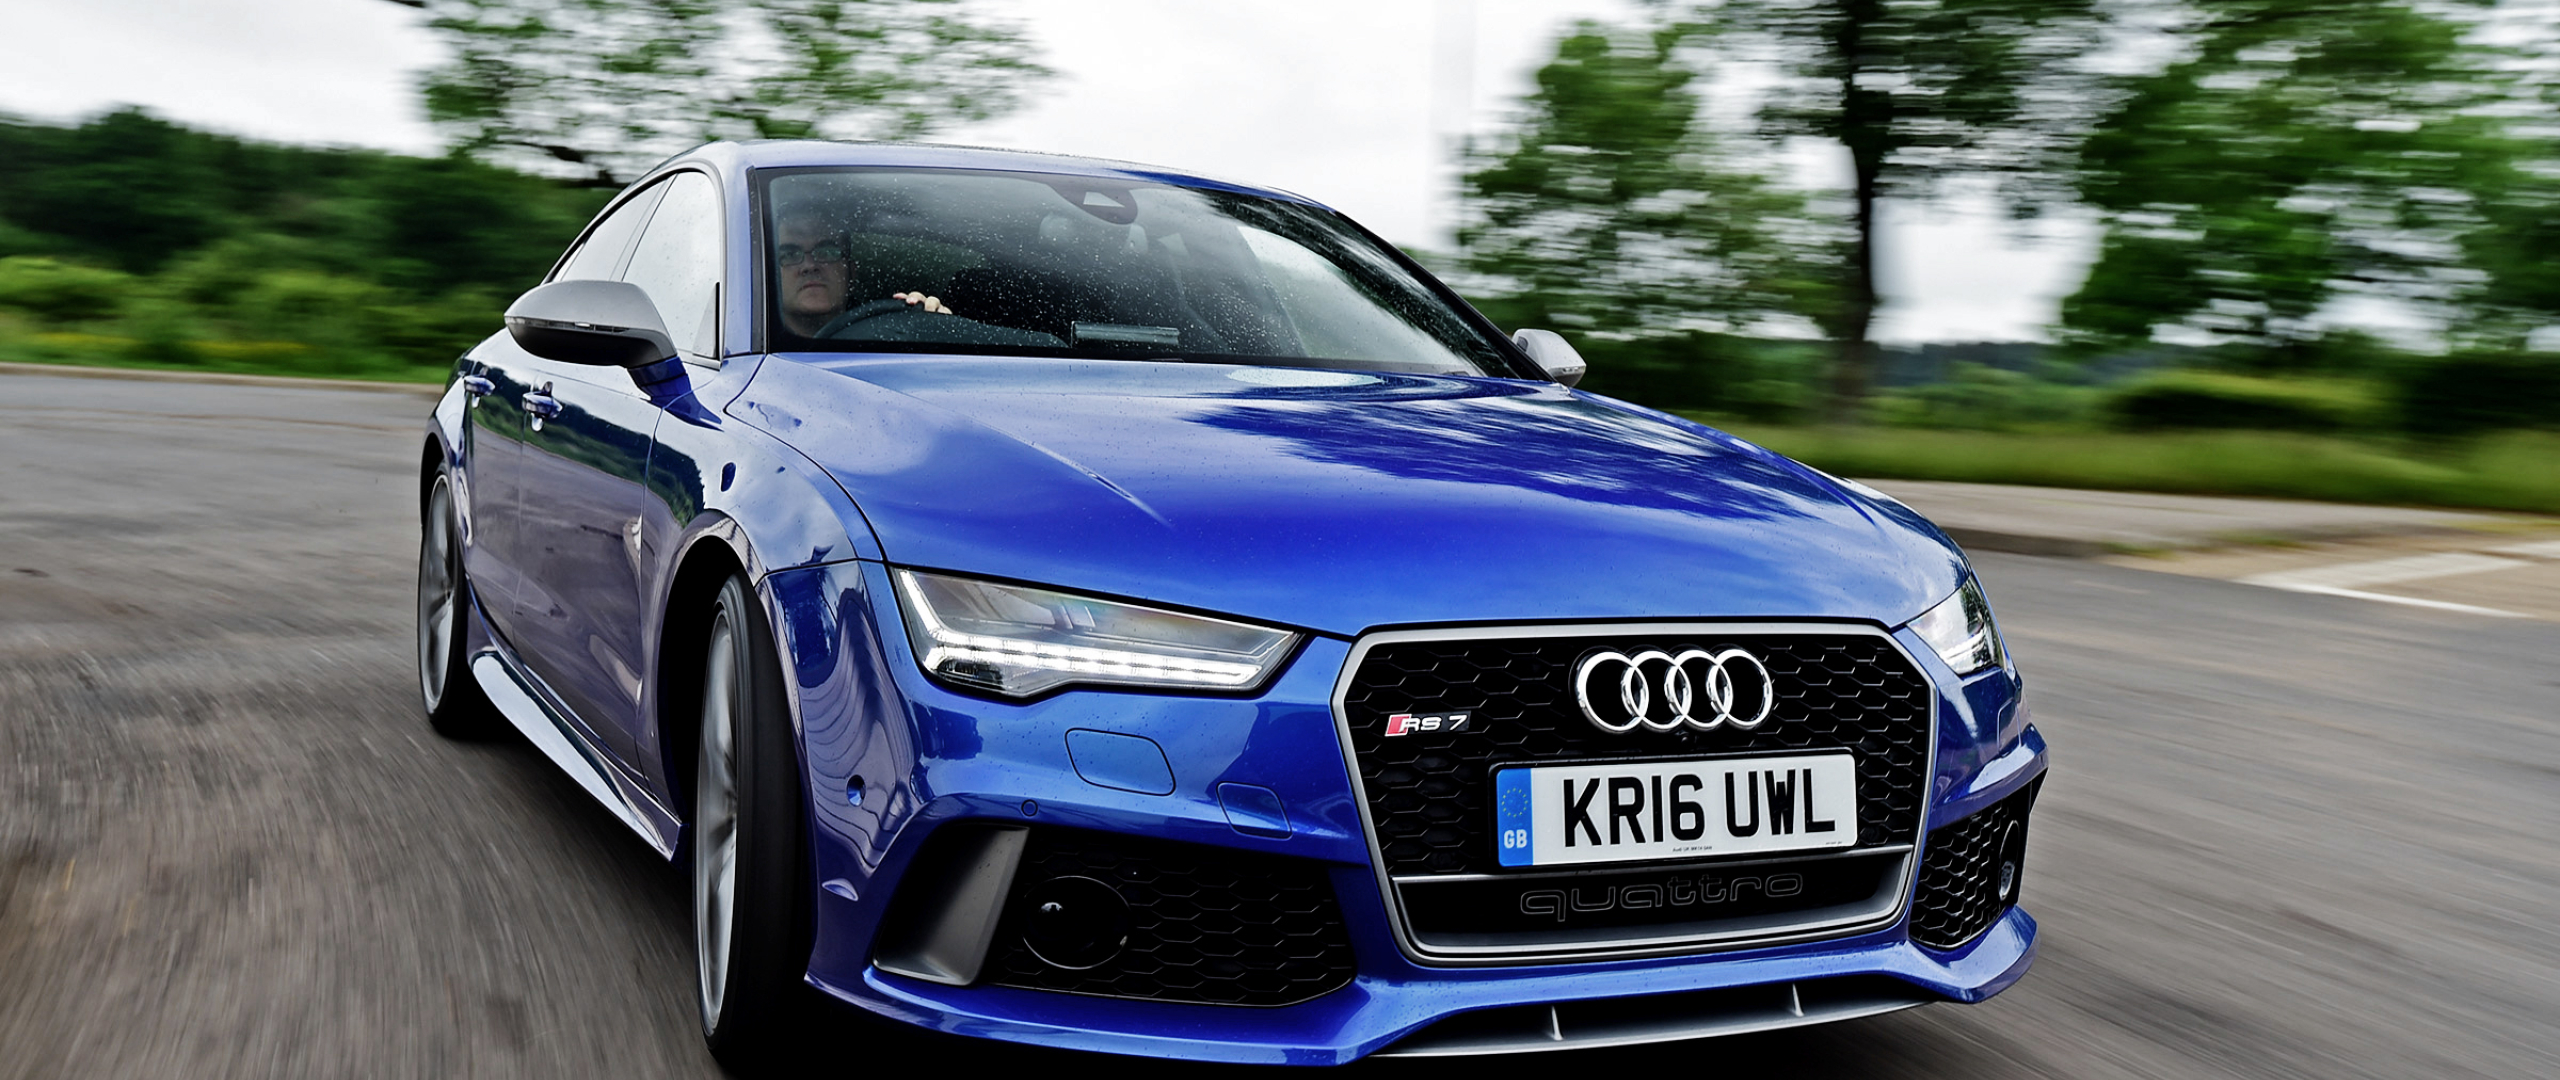 2560x1080 Audi Sportback Rs7 2560x1080 Resolution Wallpaper Hd Cars 4k Wallpapers Images Photos And Background Wallpapers Den